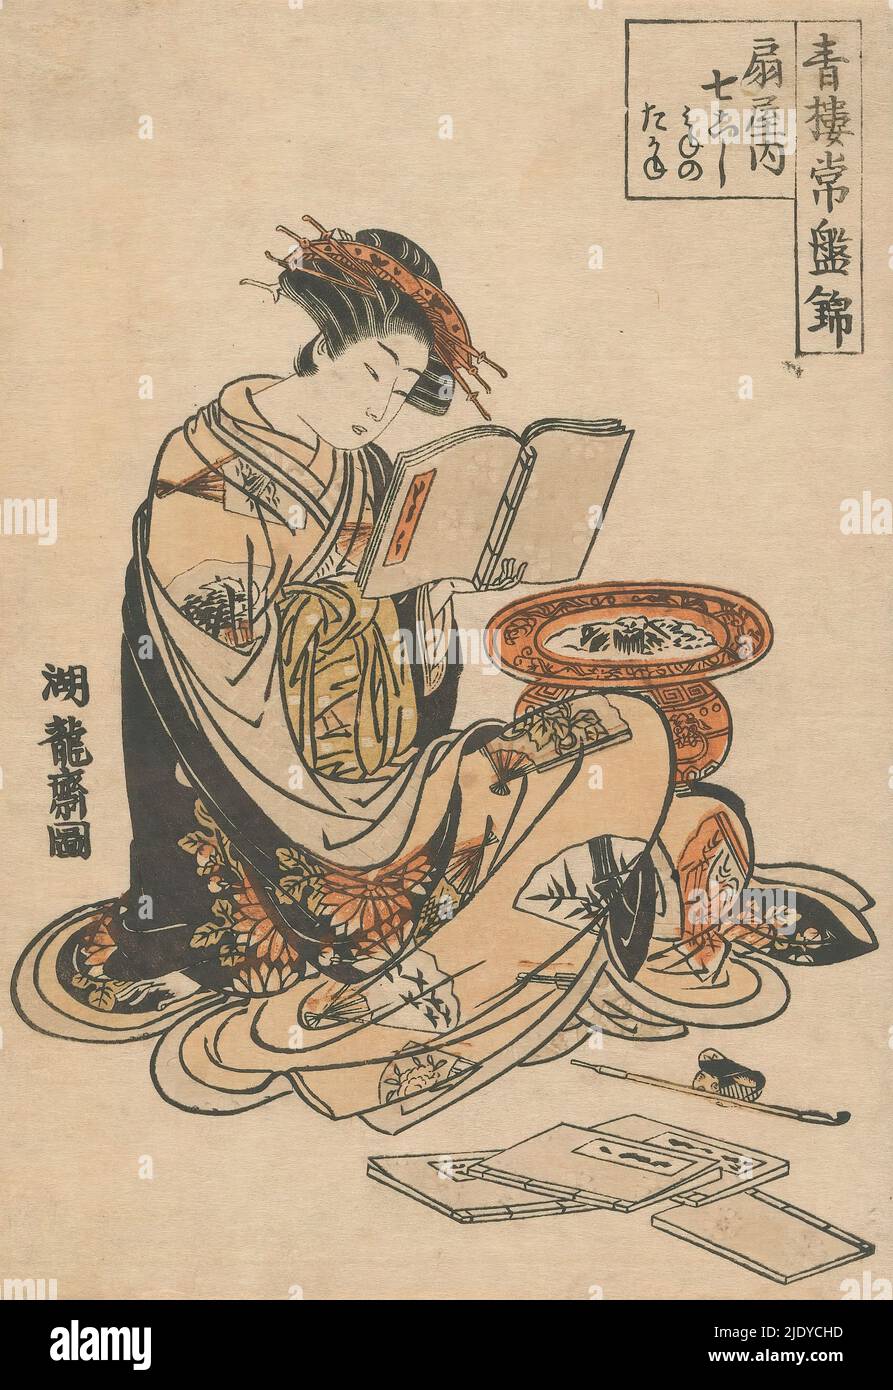 Reading woman, print maker: Isoda Kôryûsai, (mentioned on object), 1764 and/or 1900 - 1925, paper, color woodcut, height 218 mm × width 151 mm Stock Photo